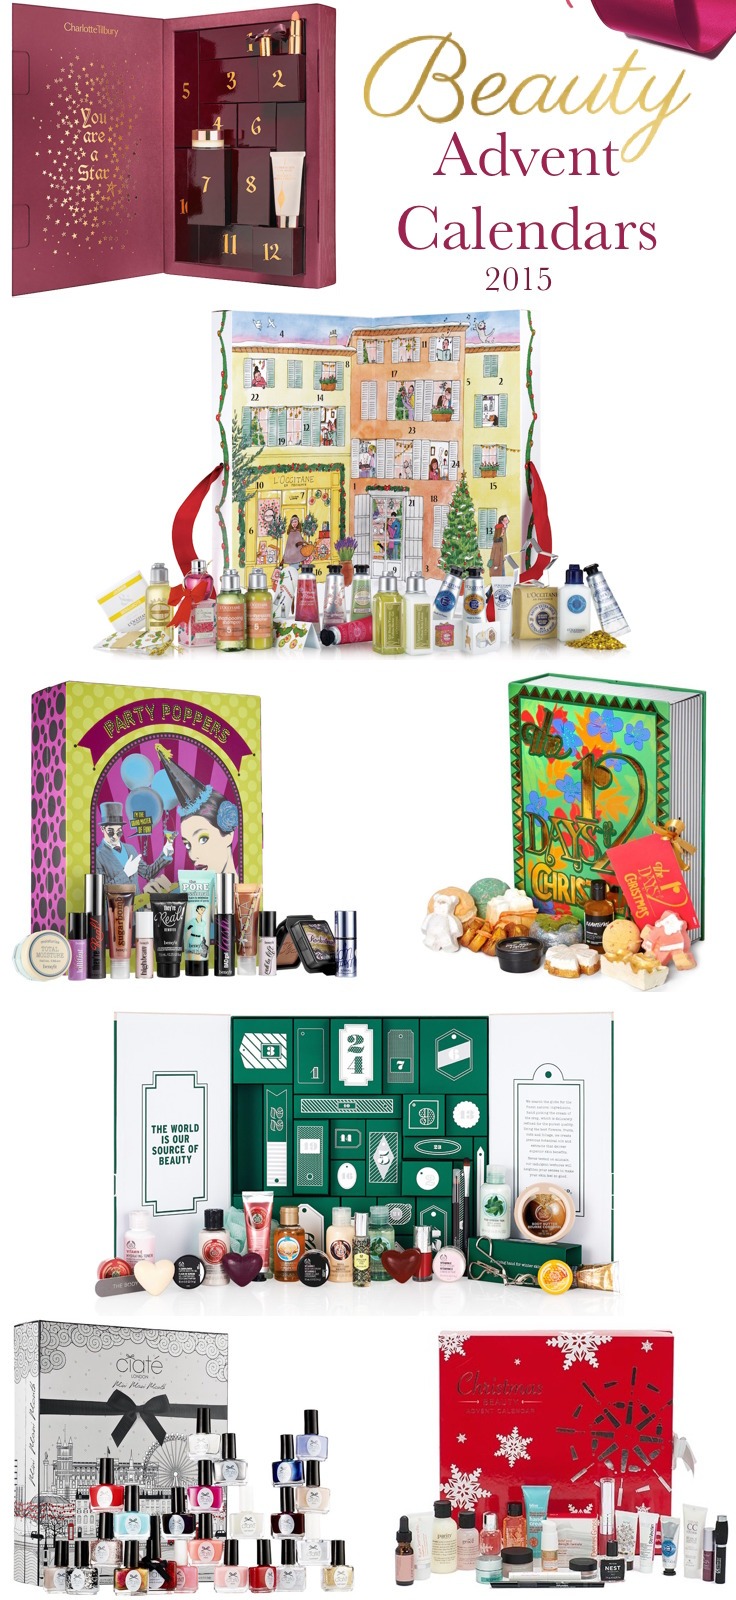 Here are the best beauty Advent calendars for 2015...bring on the beauty treats and make it Christmas every day!